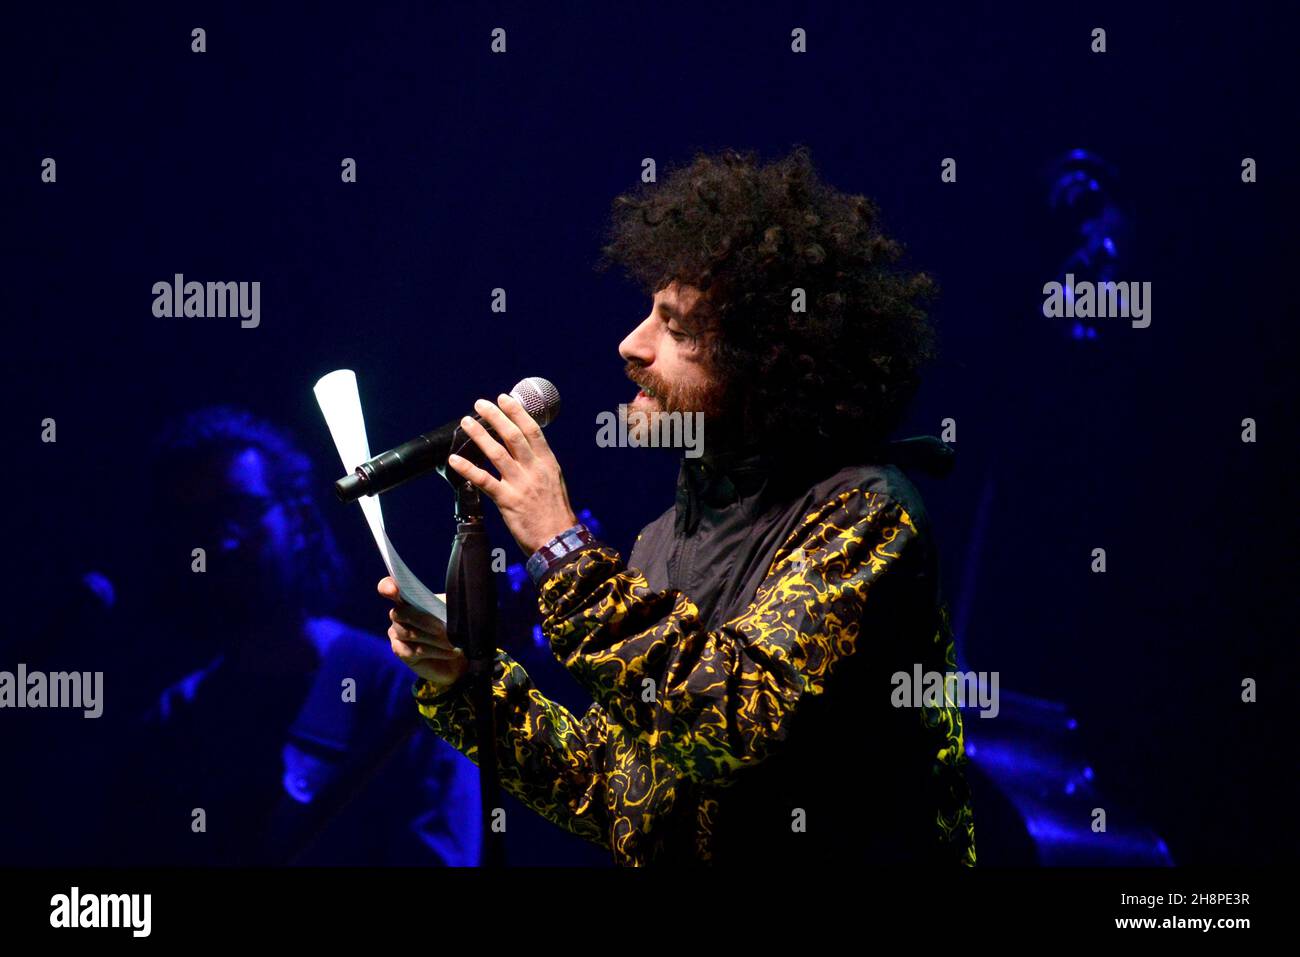 Rome, Italy. 30th Nov, 2021. Gio Evan, Singer during "Abissaleâ&#x80;&#x9d;  the new theatrical tour of the singer Gio Evan, Italian singer Music  Concert in Rome, Italy, November 30 2021 Credit: Independent Photo